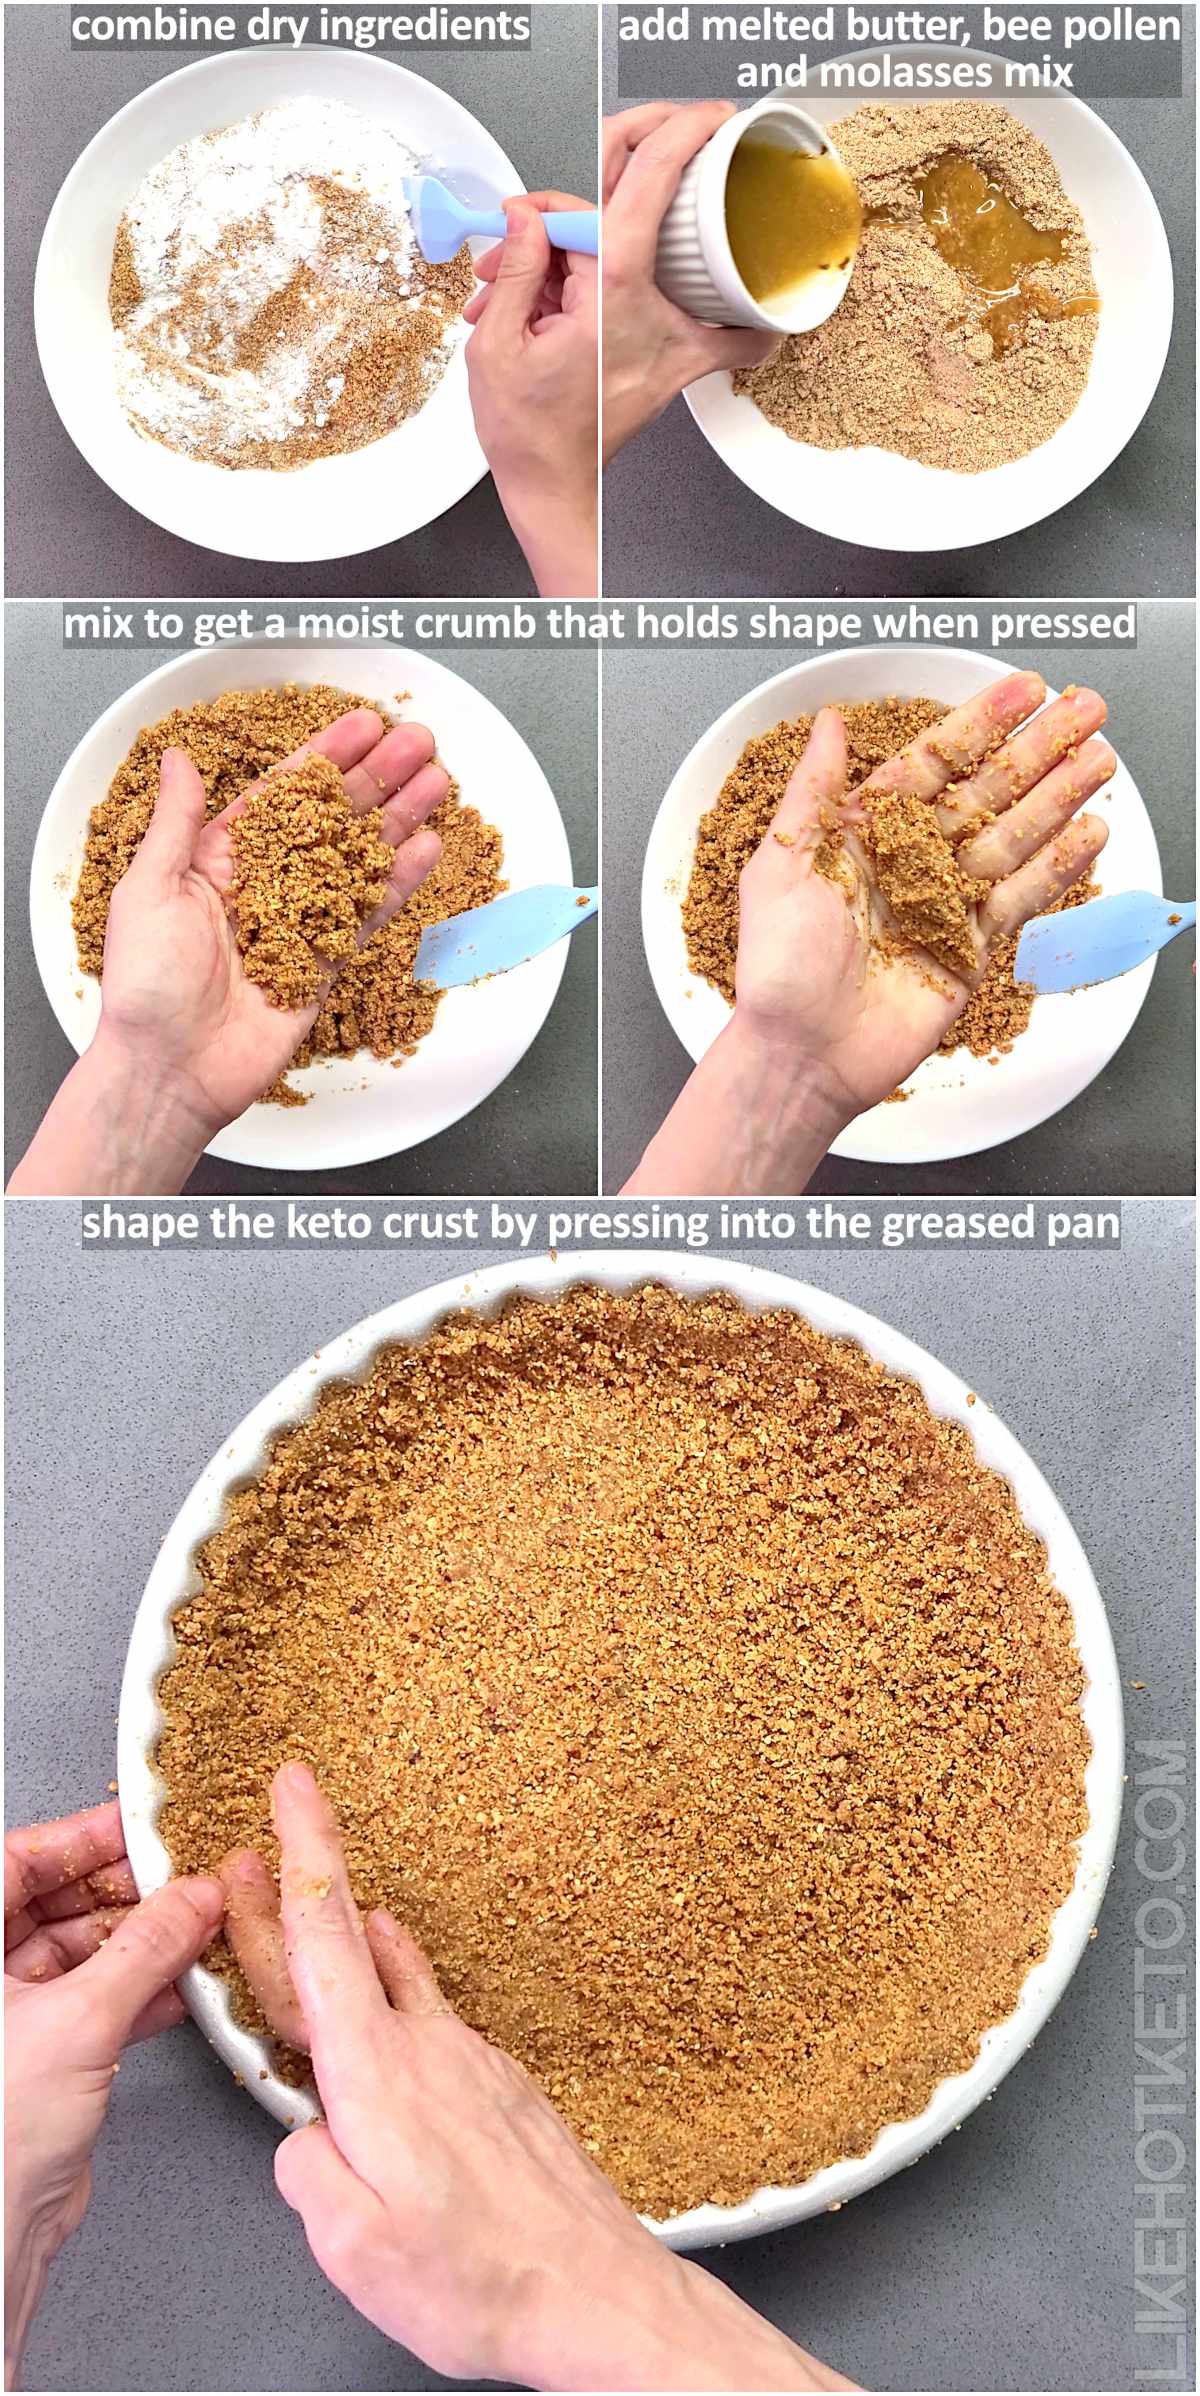 Steps to make the keto Graham cracker crust in images.